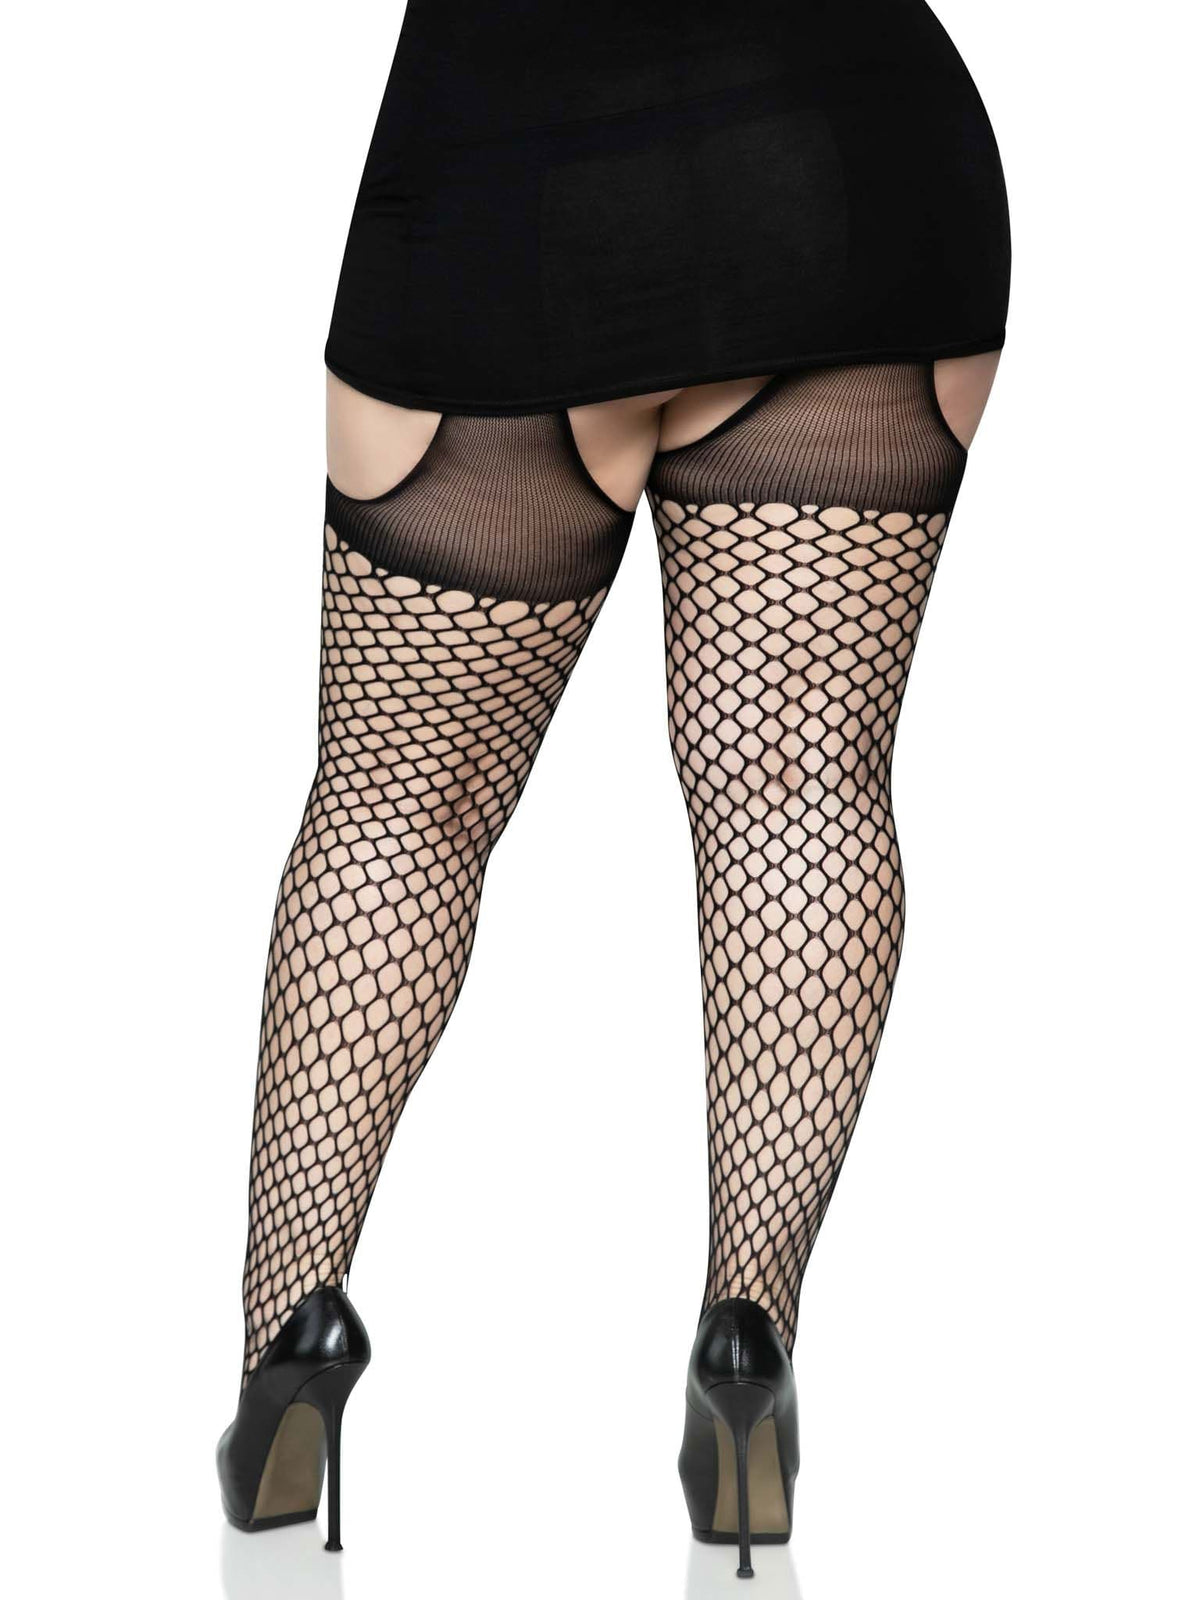 oval net suspender hose with opaque top 1x 2x size black